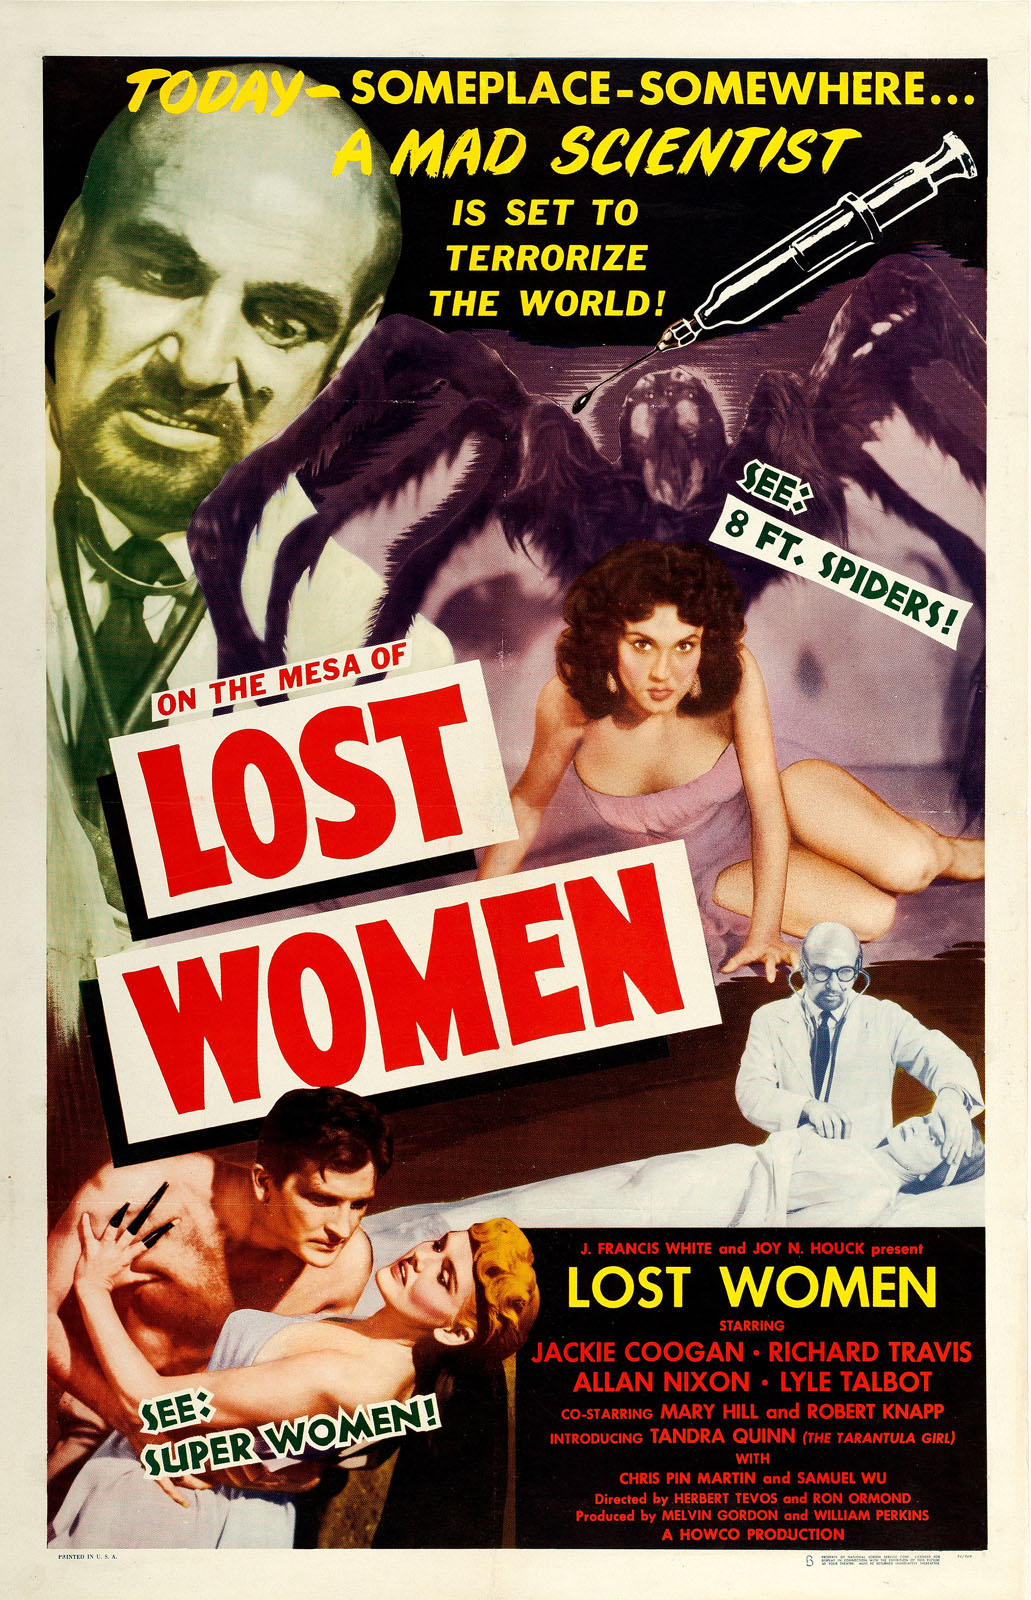 ON THE MESA OF LOST WOMEN